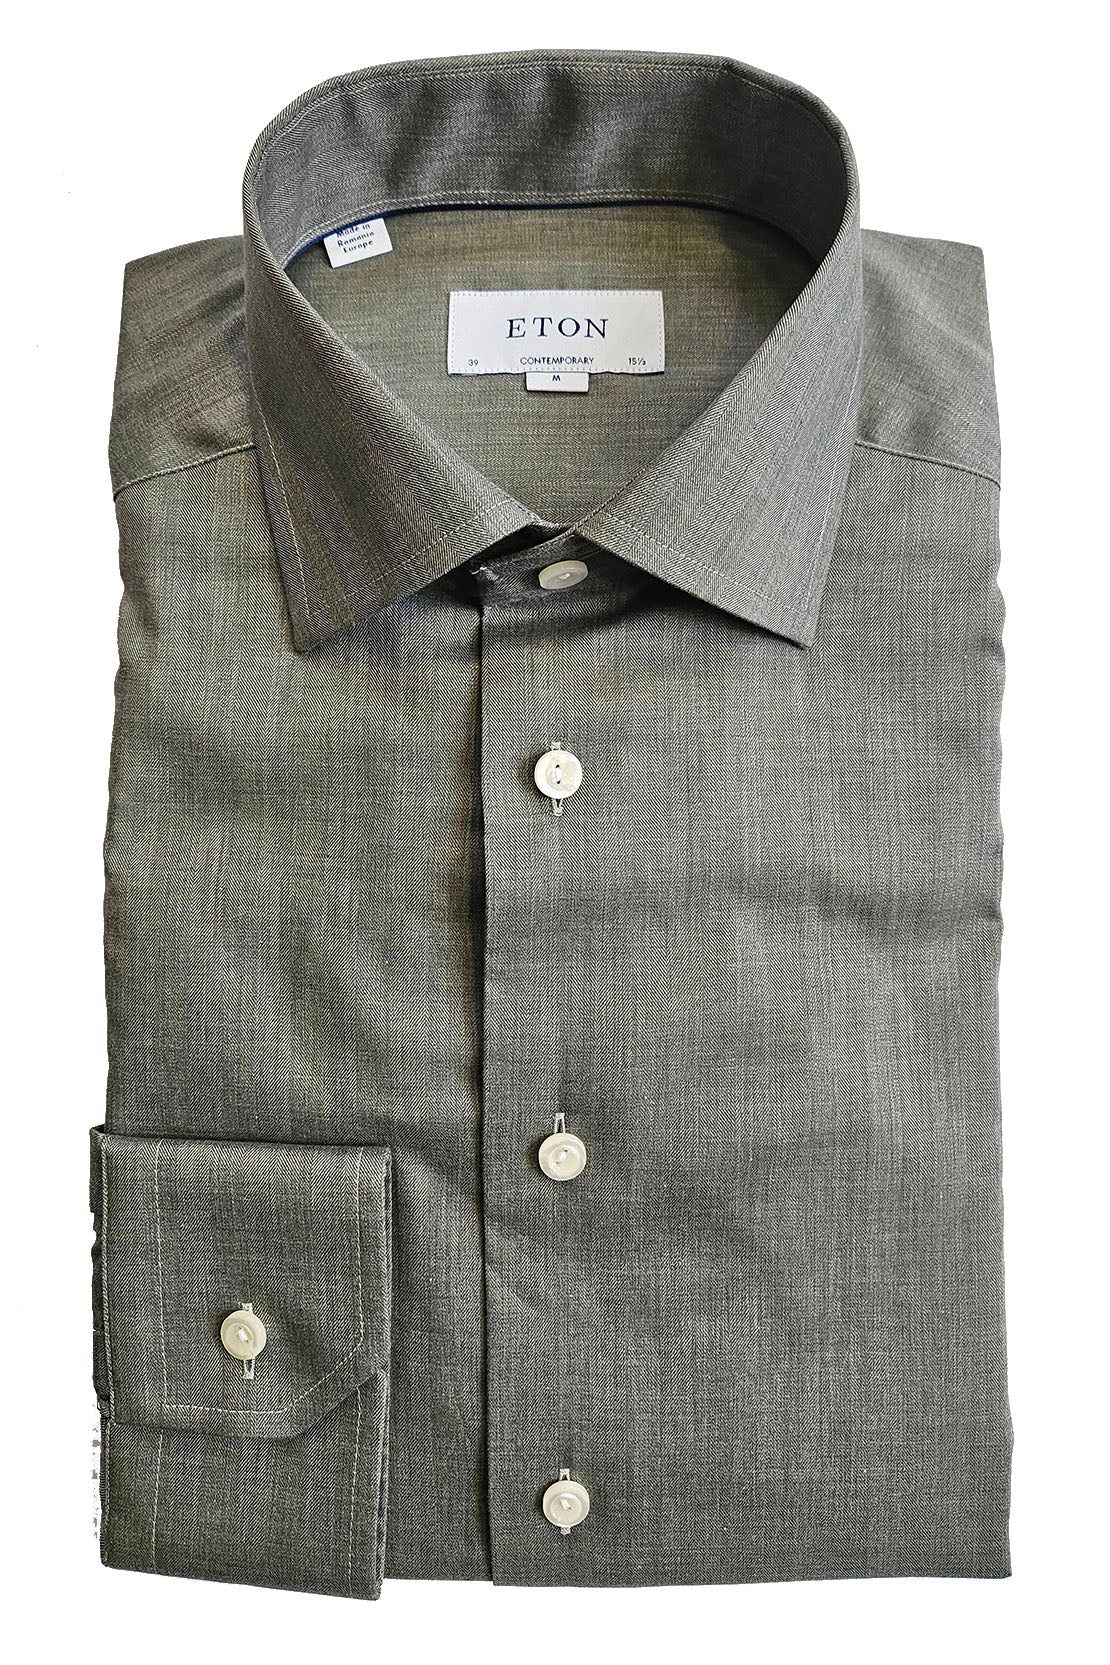 ETON - CONTEMPORARY FIT Wrinkle Free Flannel Shirt In Green 10001069162